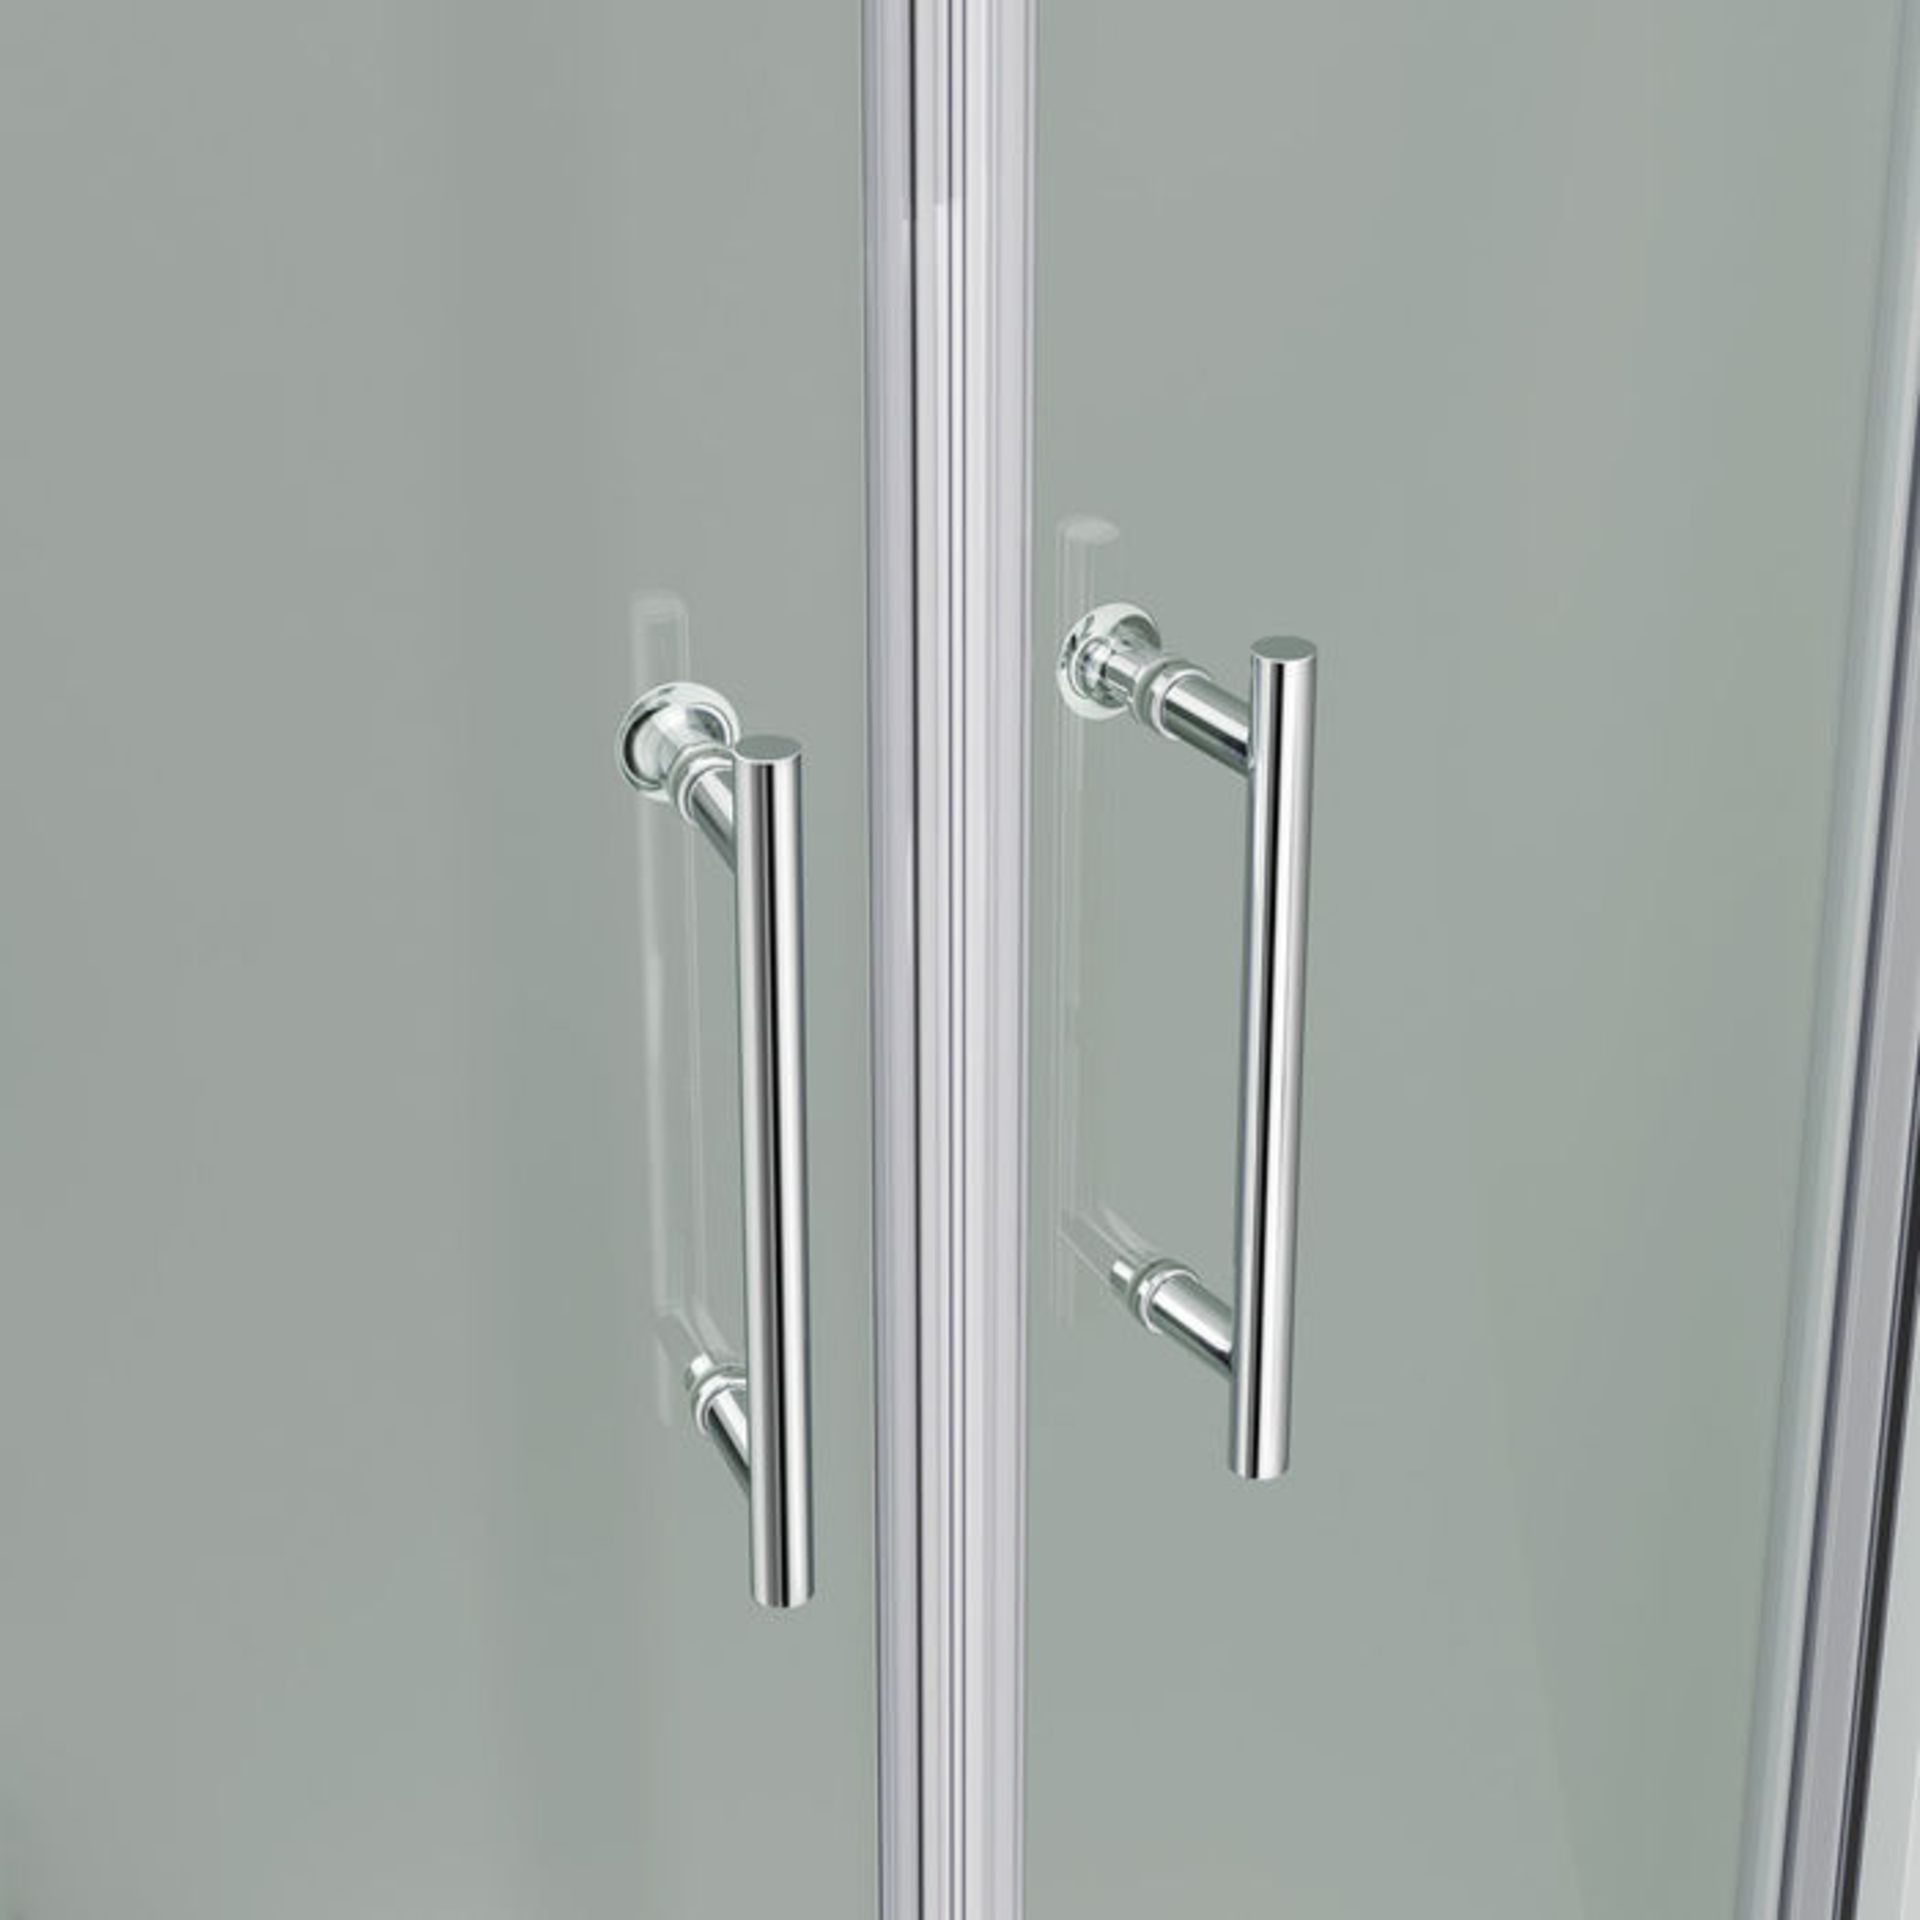 (XM24) 800x800mm - 6mm - Elements Quadrant Shower Enclosure. RRP £299.99. 6mm Safety Glass Fully - Image 4 of 4